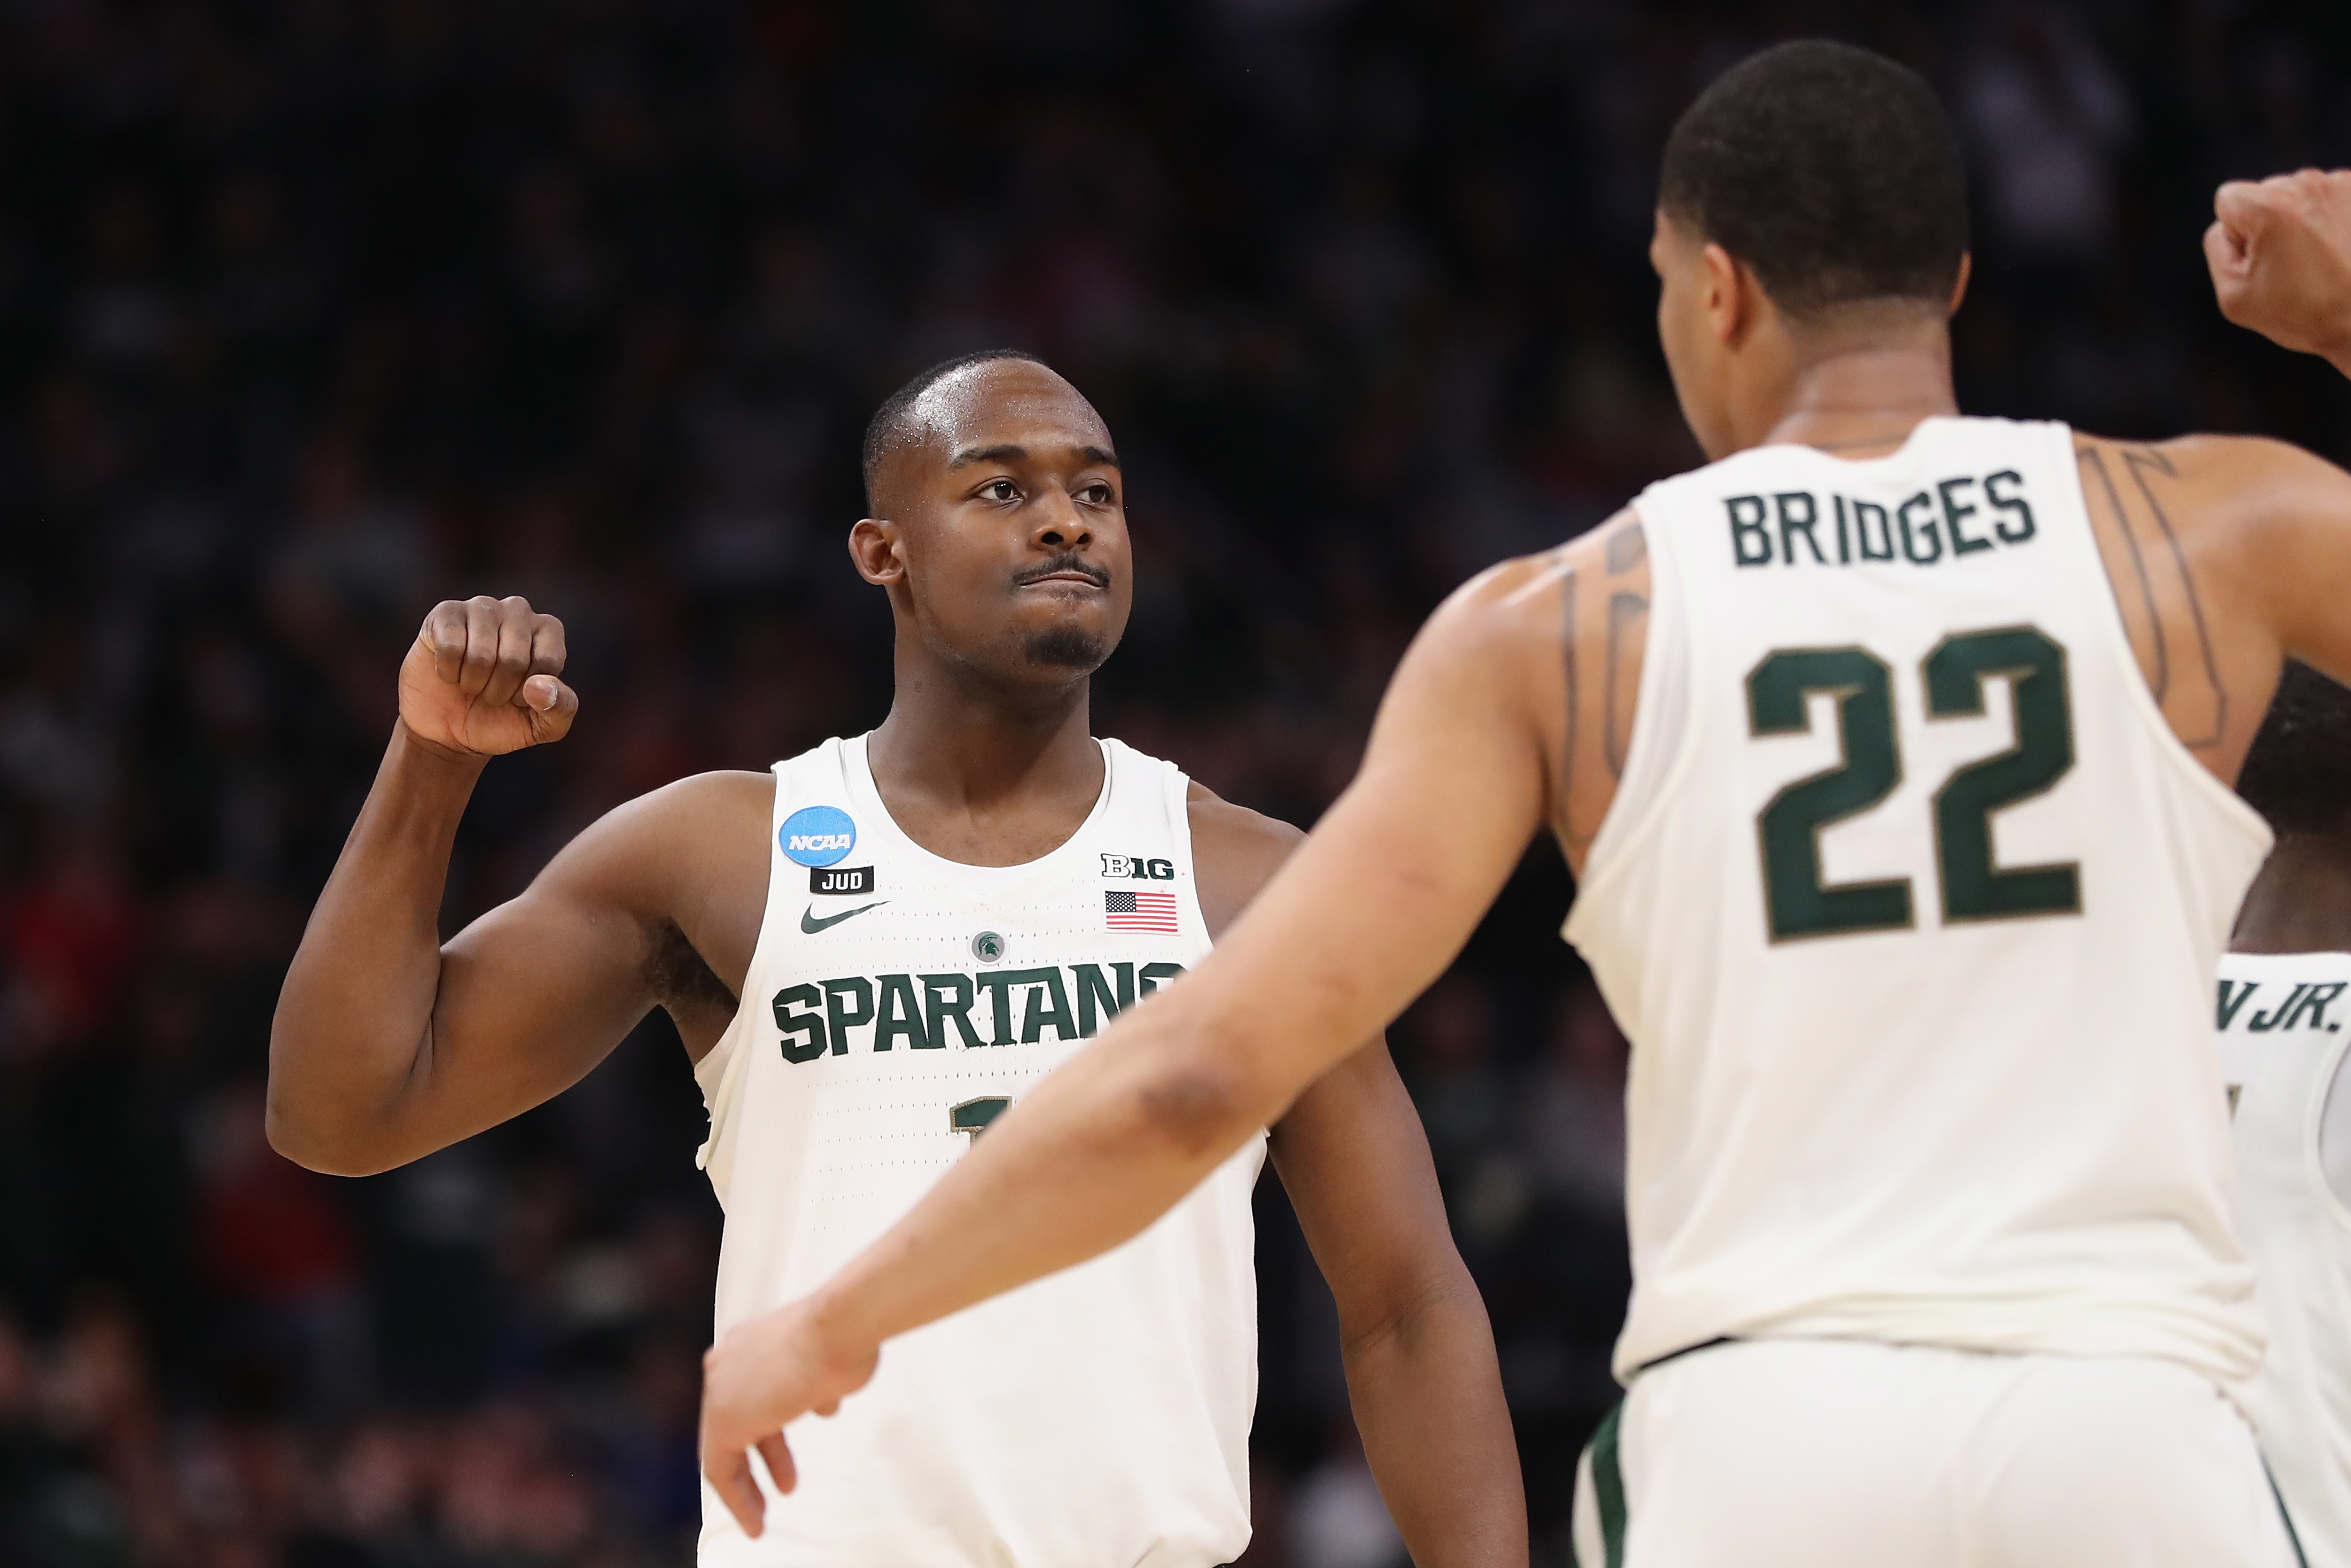 Michigan State vs Syracuse live stream How to watch online